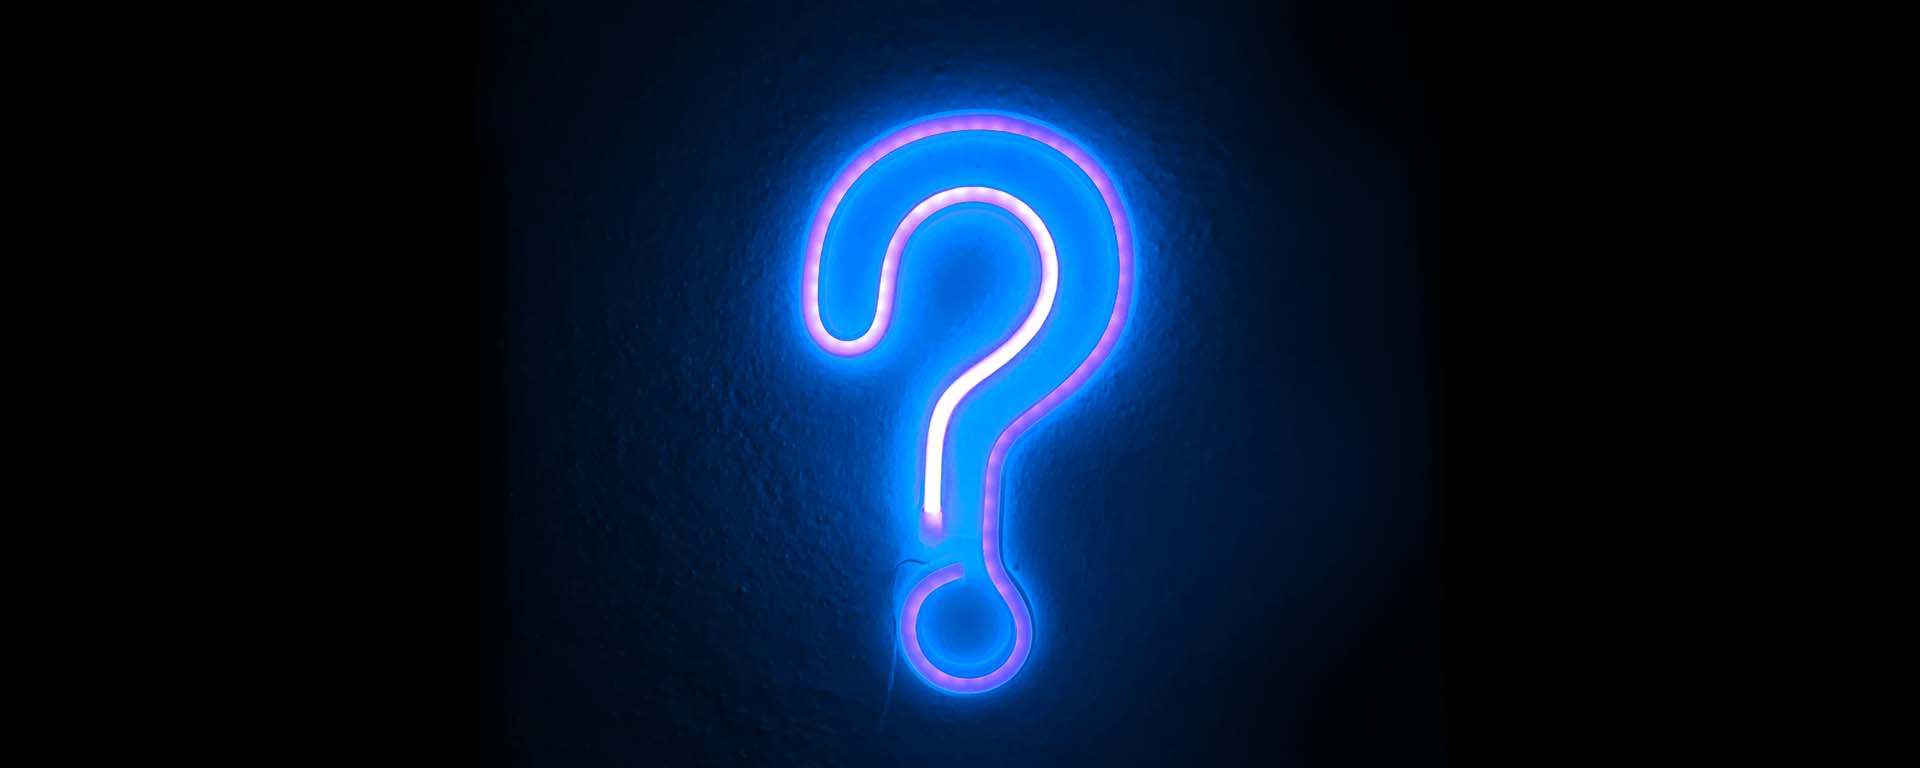 Neon Blue Question Mark Sign